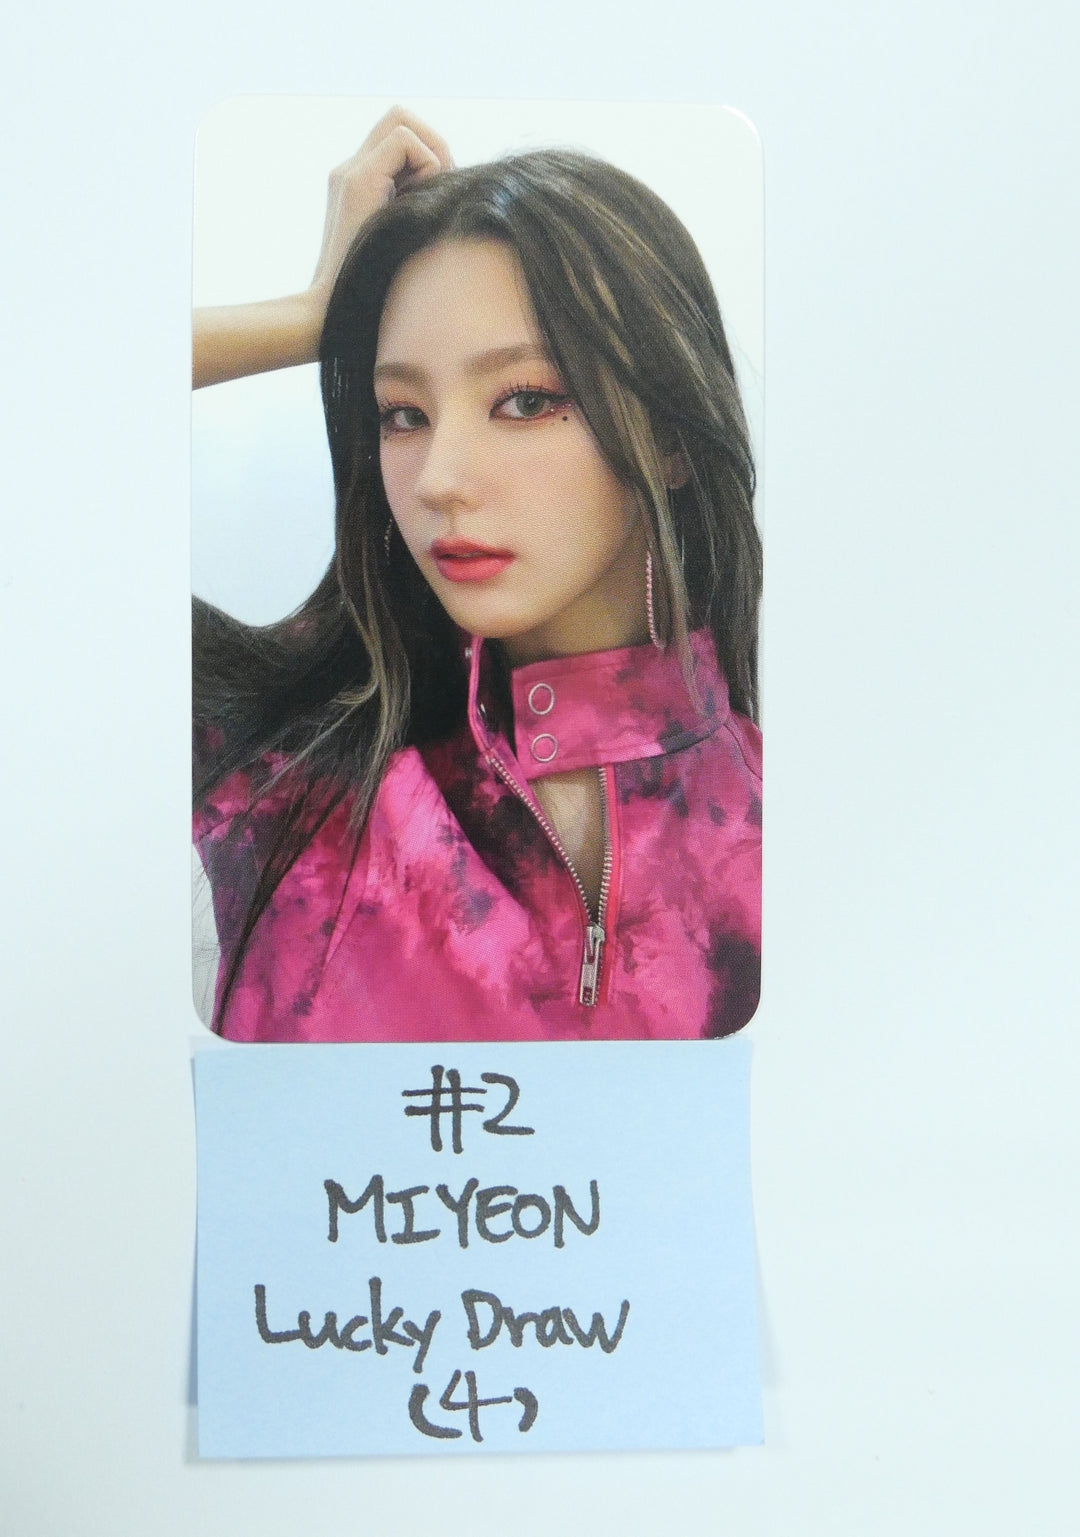 (g) I-DLE "I NEVER DIE" - AppleMusic Luckydraw Event Photocard